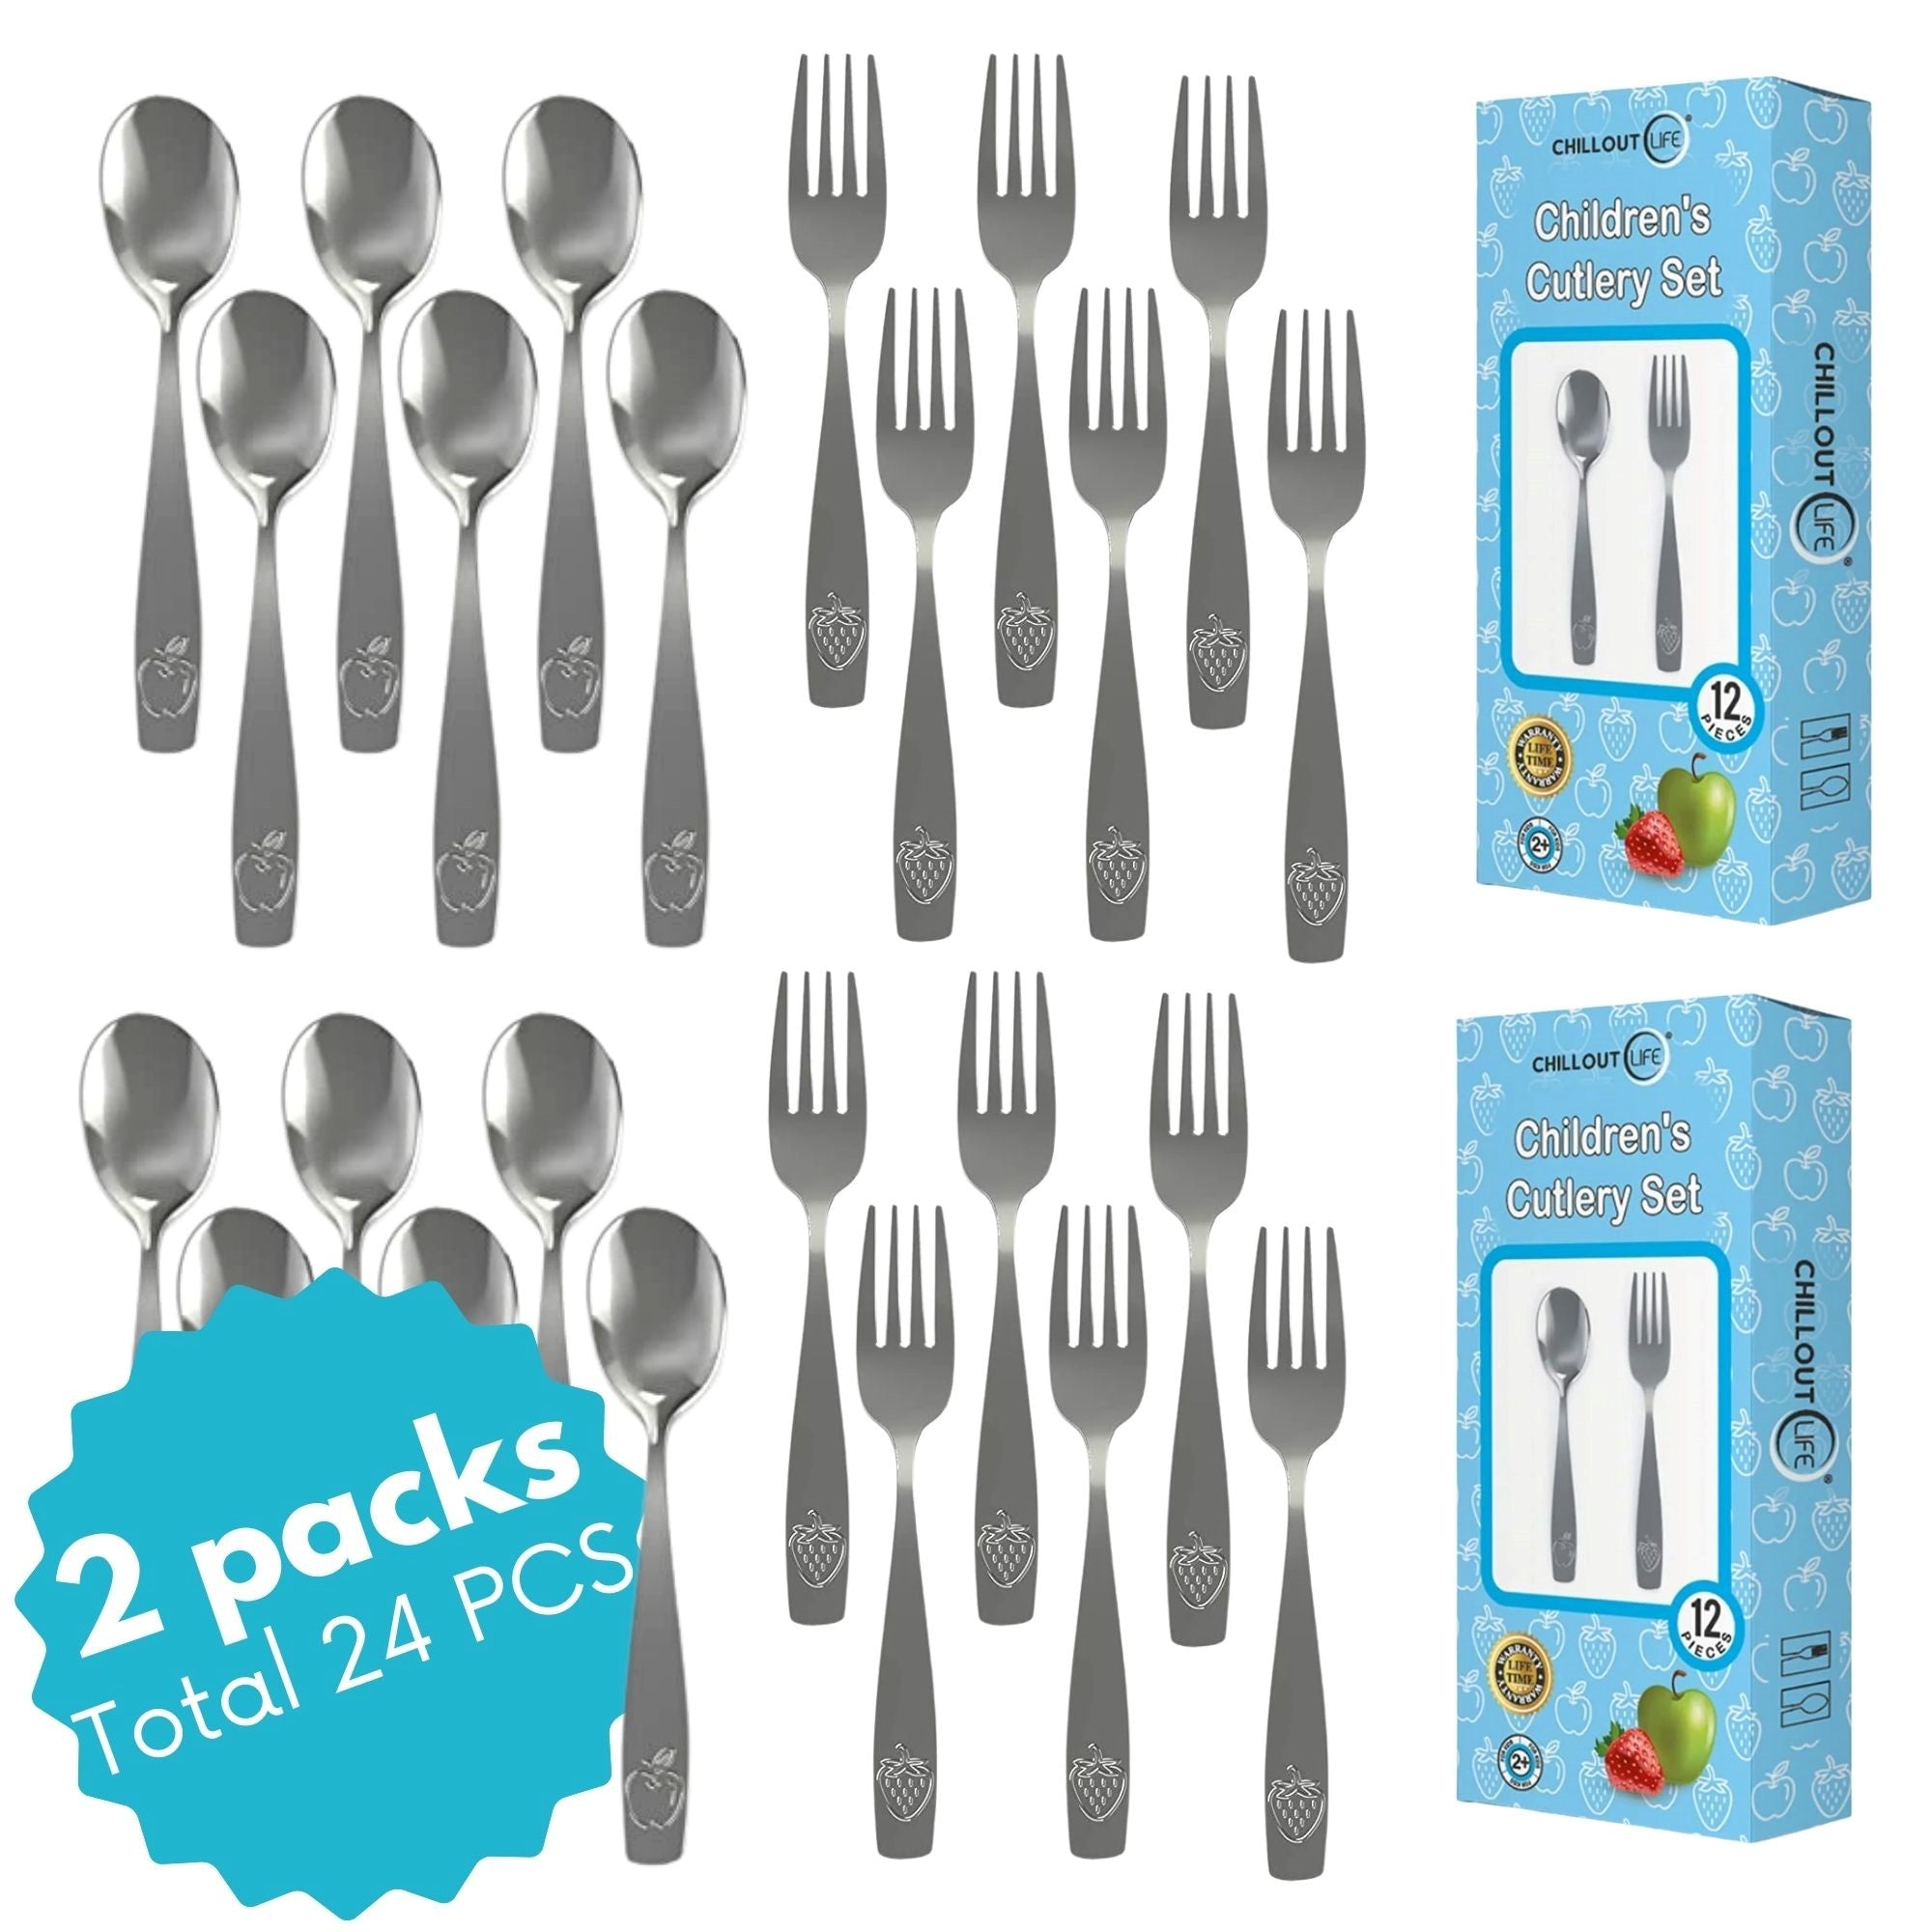 CHILLOUT LIFE 18 Piece Stainless Steel Kids Silverware Set (2 packs: 9